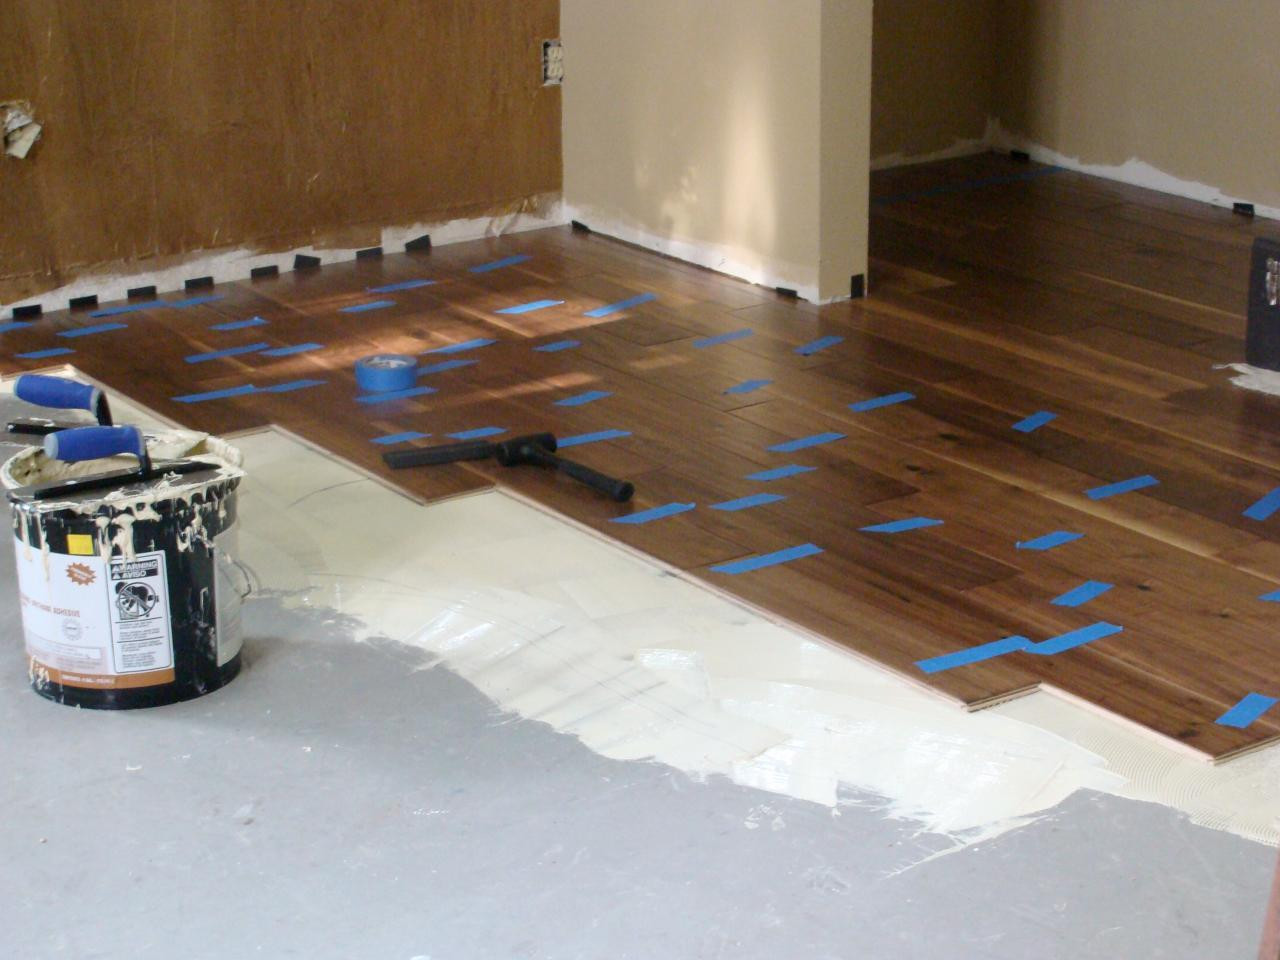 12 Recommended How to Install Hardwood Floors On Wood Subfloor 2024 free download how to install hardwood floors on wood subfloor of diy flooring ideas on a budget lovely installing hardwood flooring throughout diy flooring ideas on a budget lovely installing hardwood flo